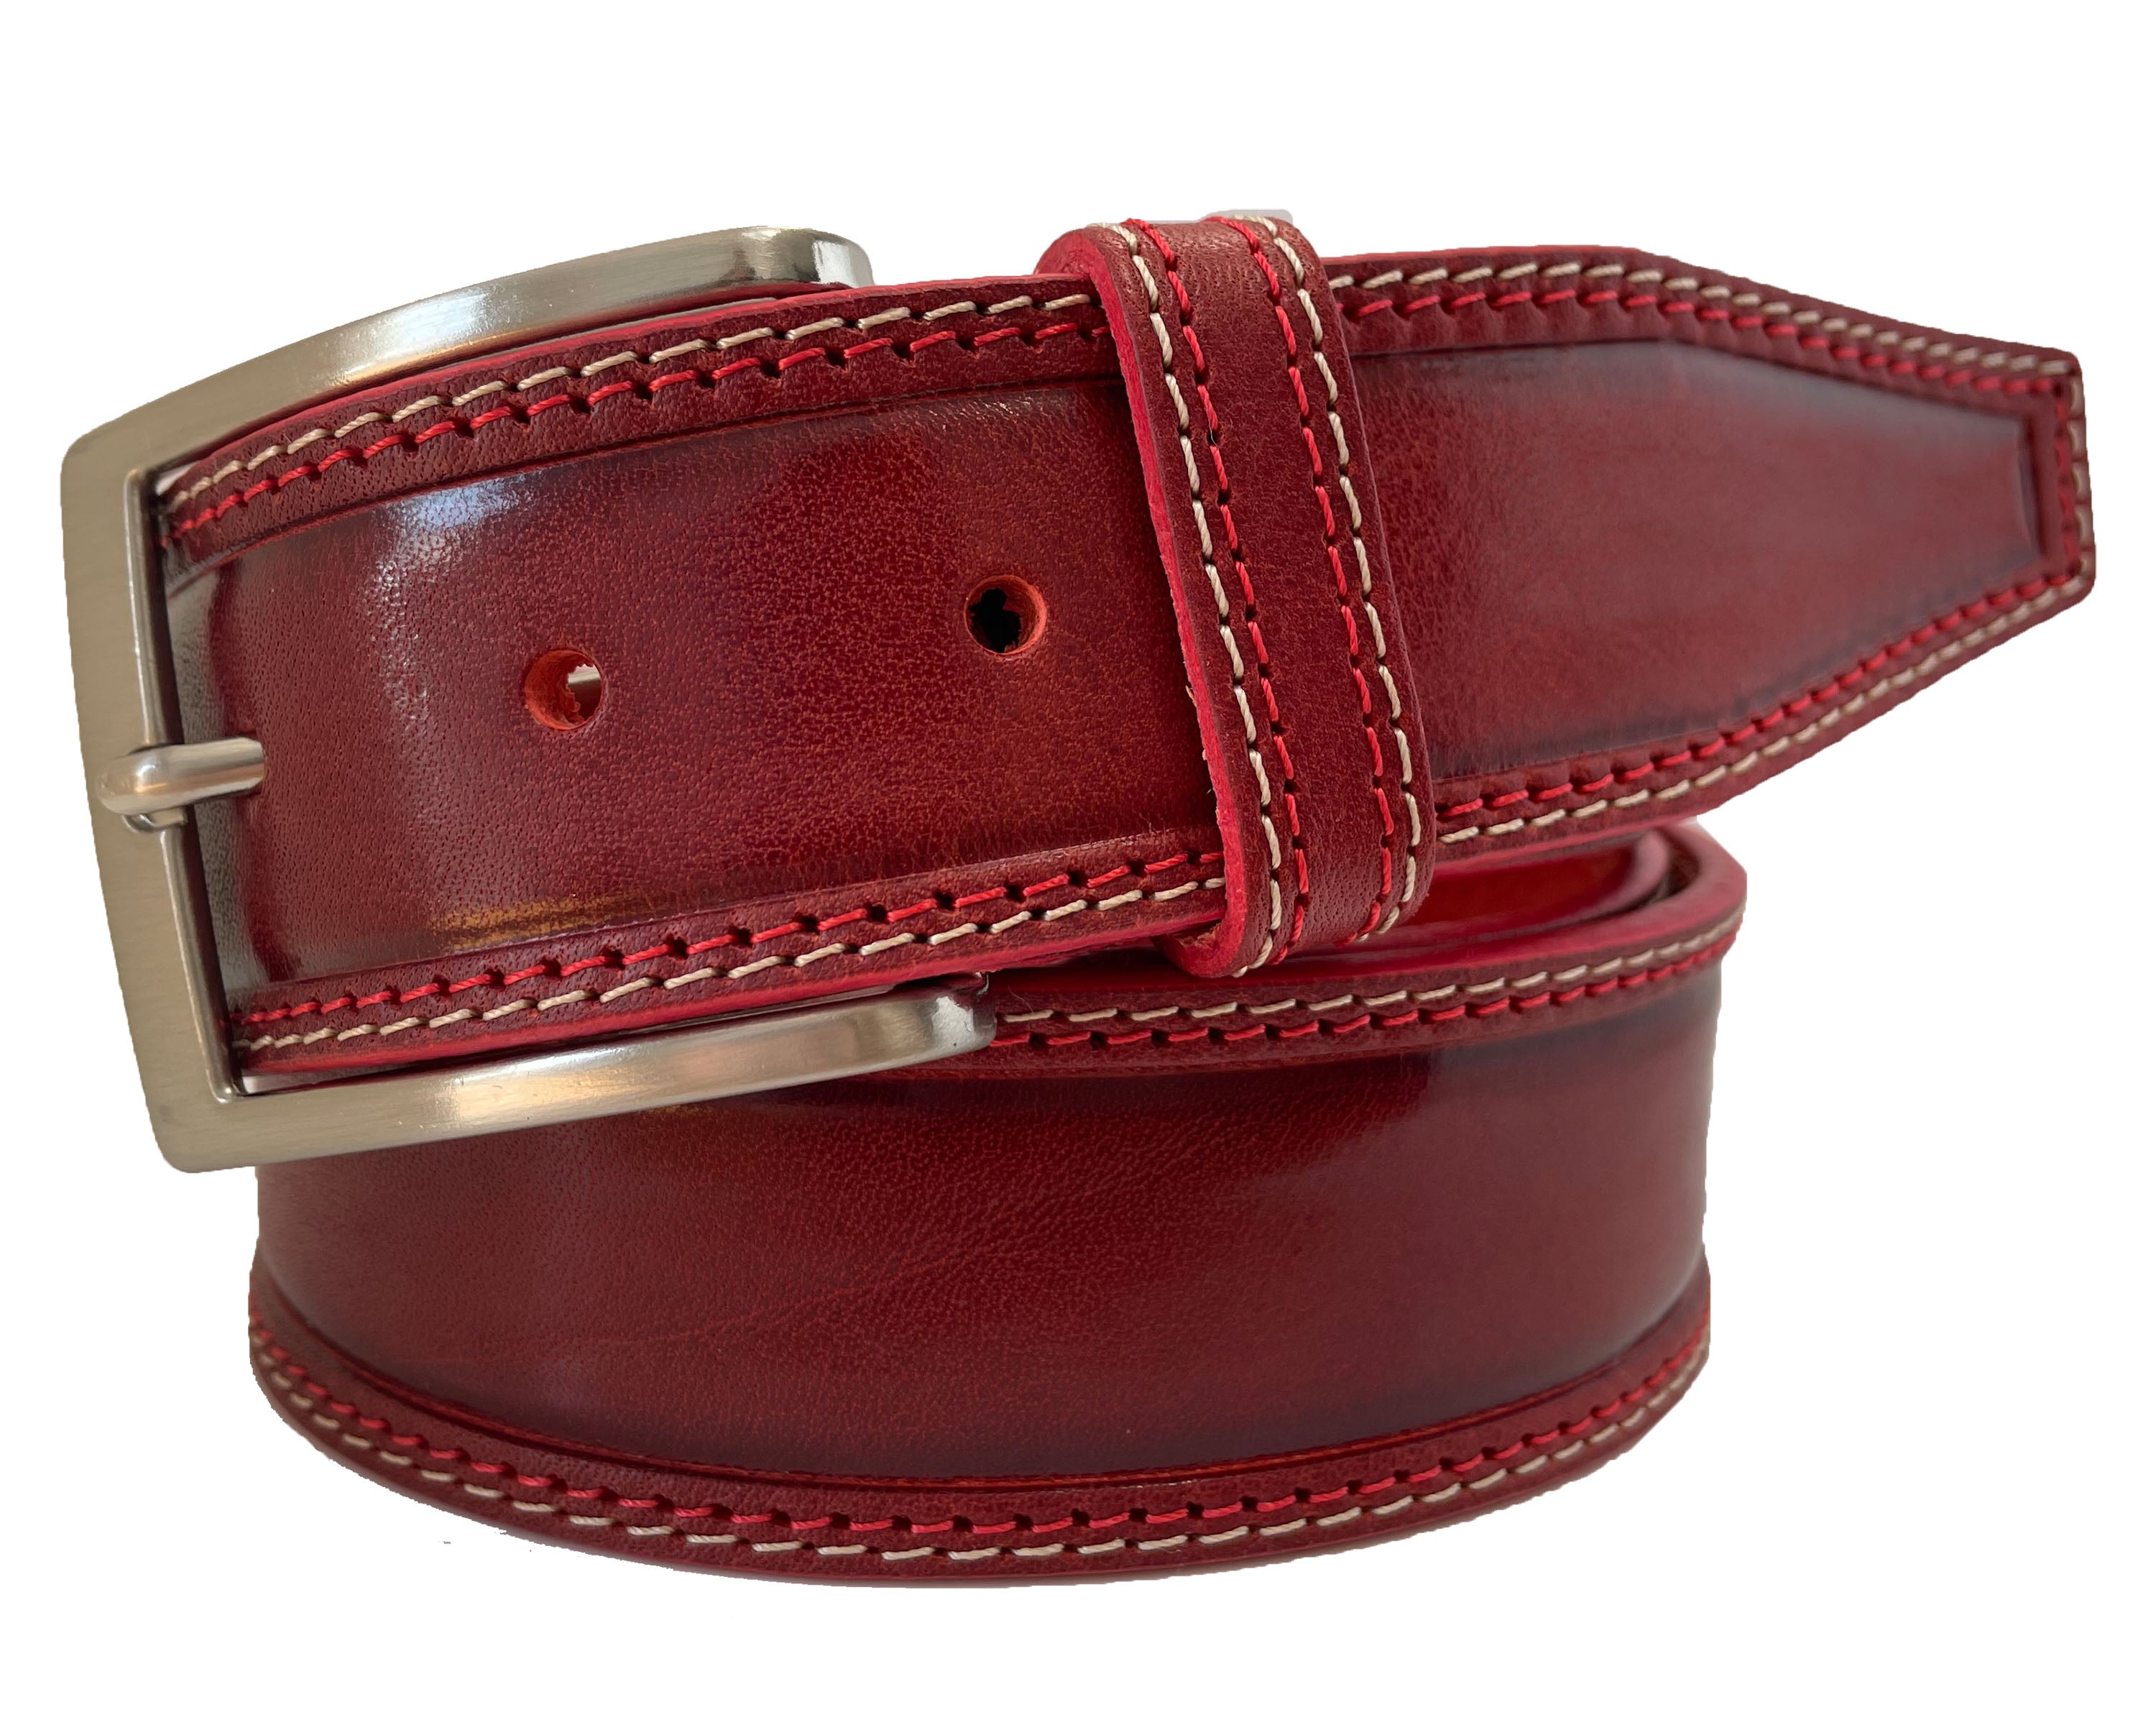 RED DOUBLE STITCHED 40MM CLASSIC HIDE LEATHER BELT